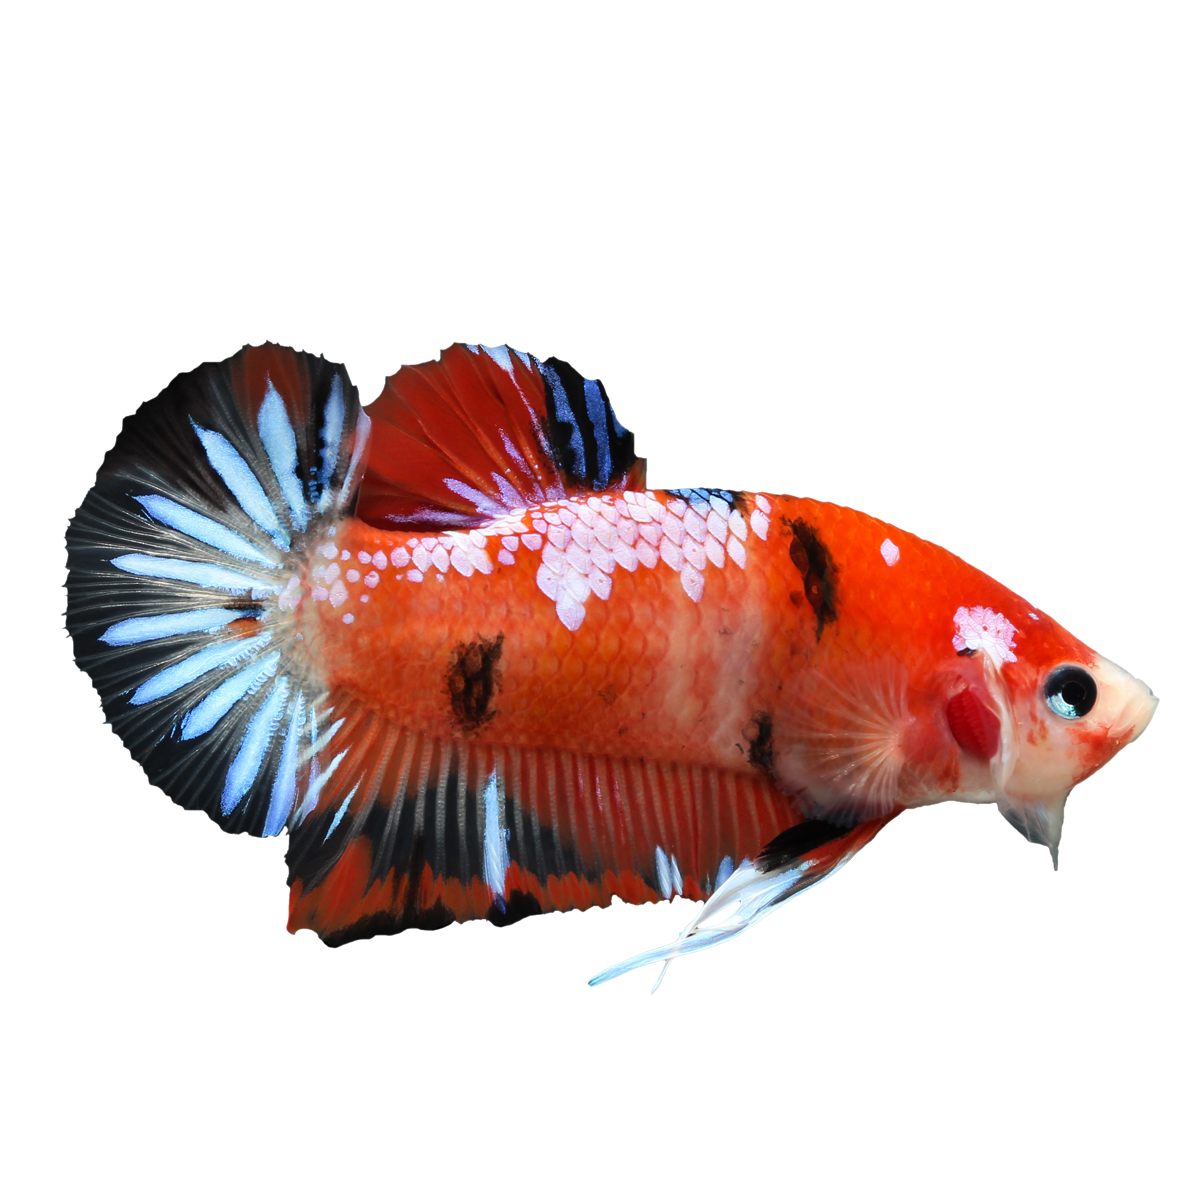 Betta PNG Images HD